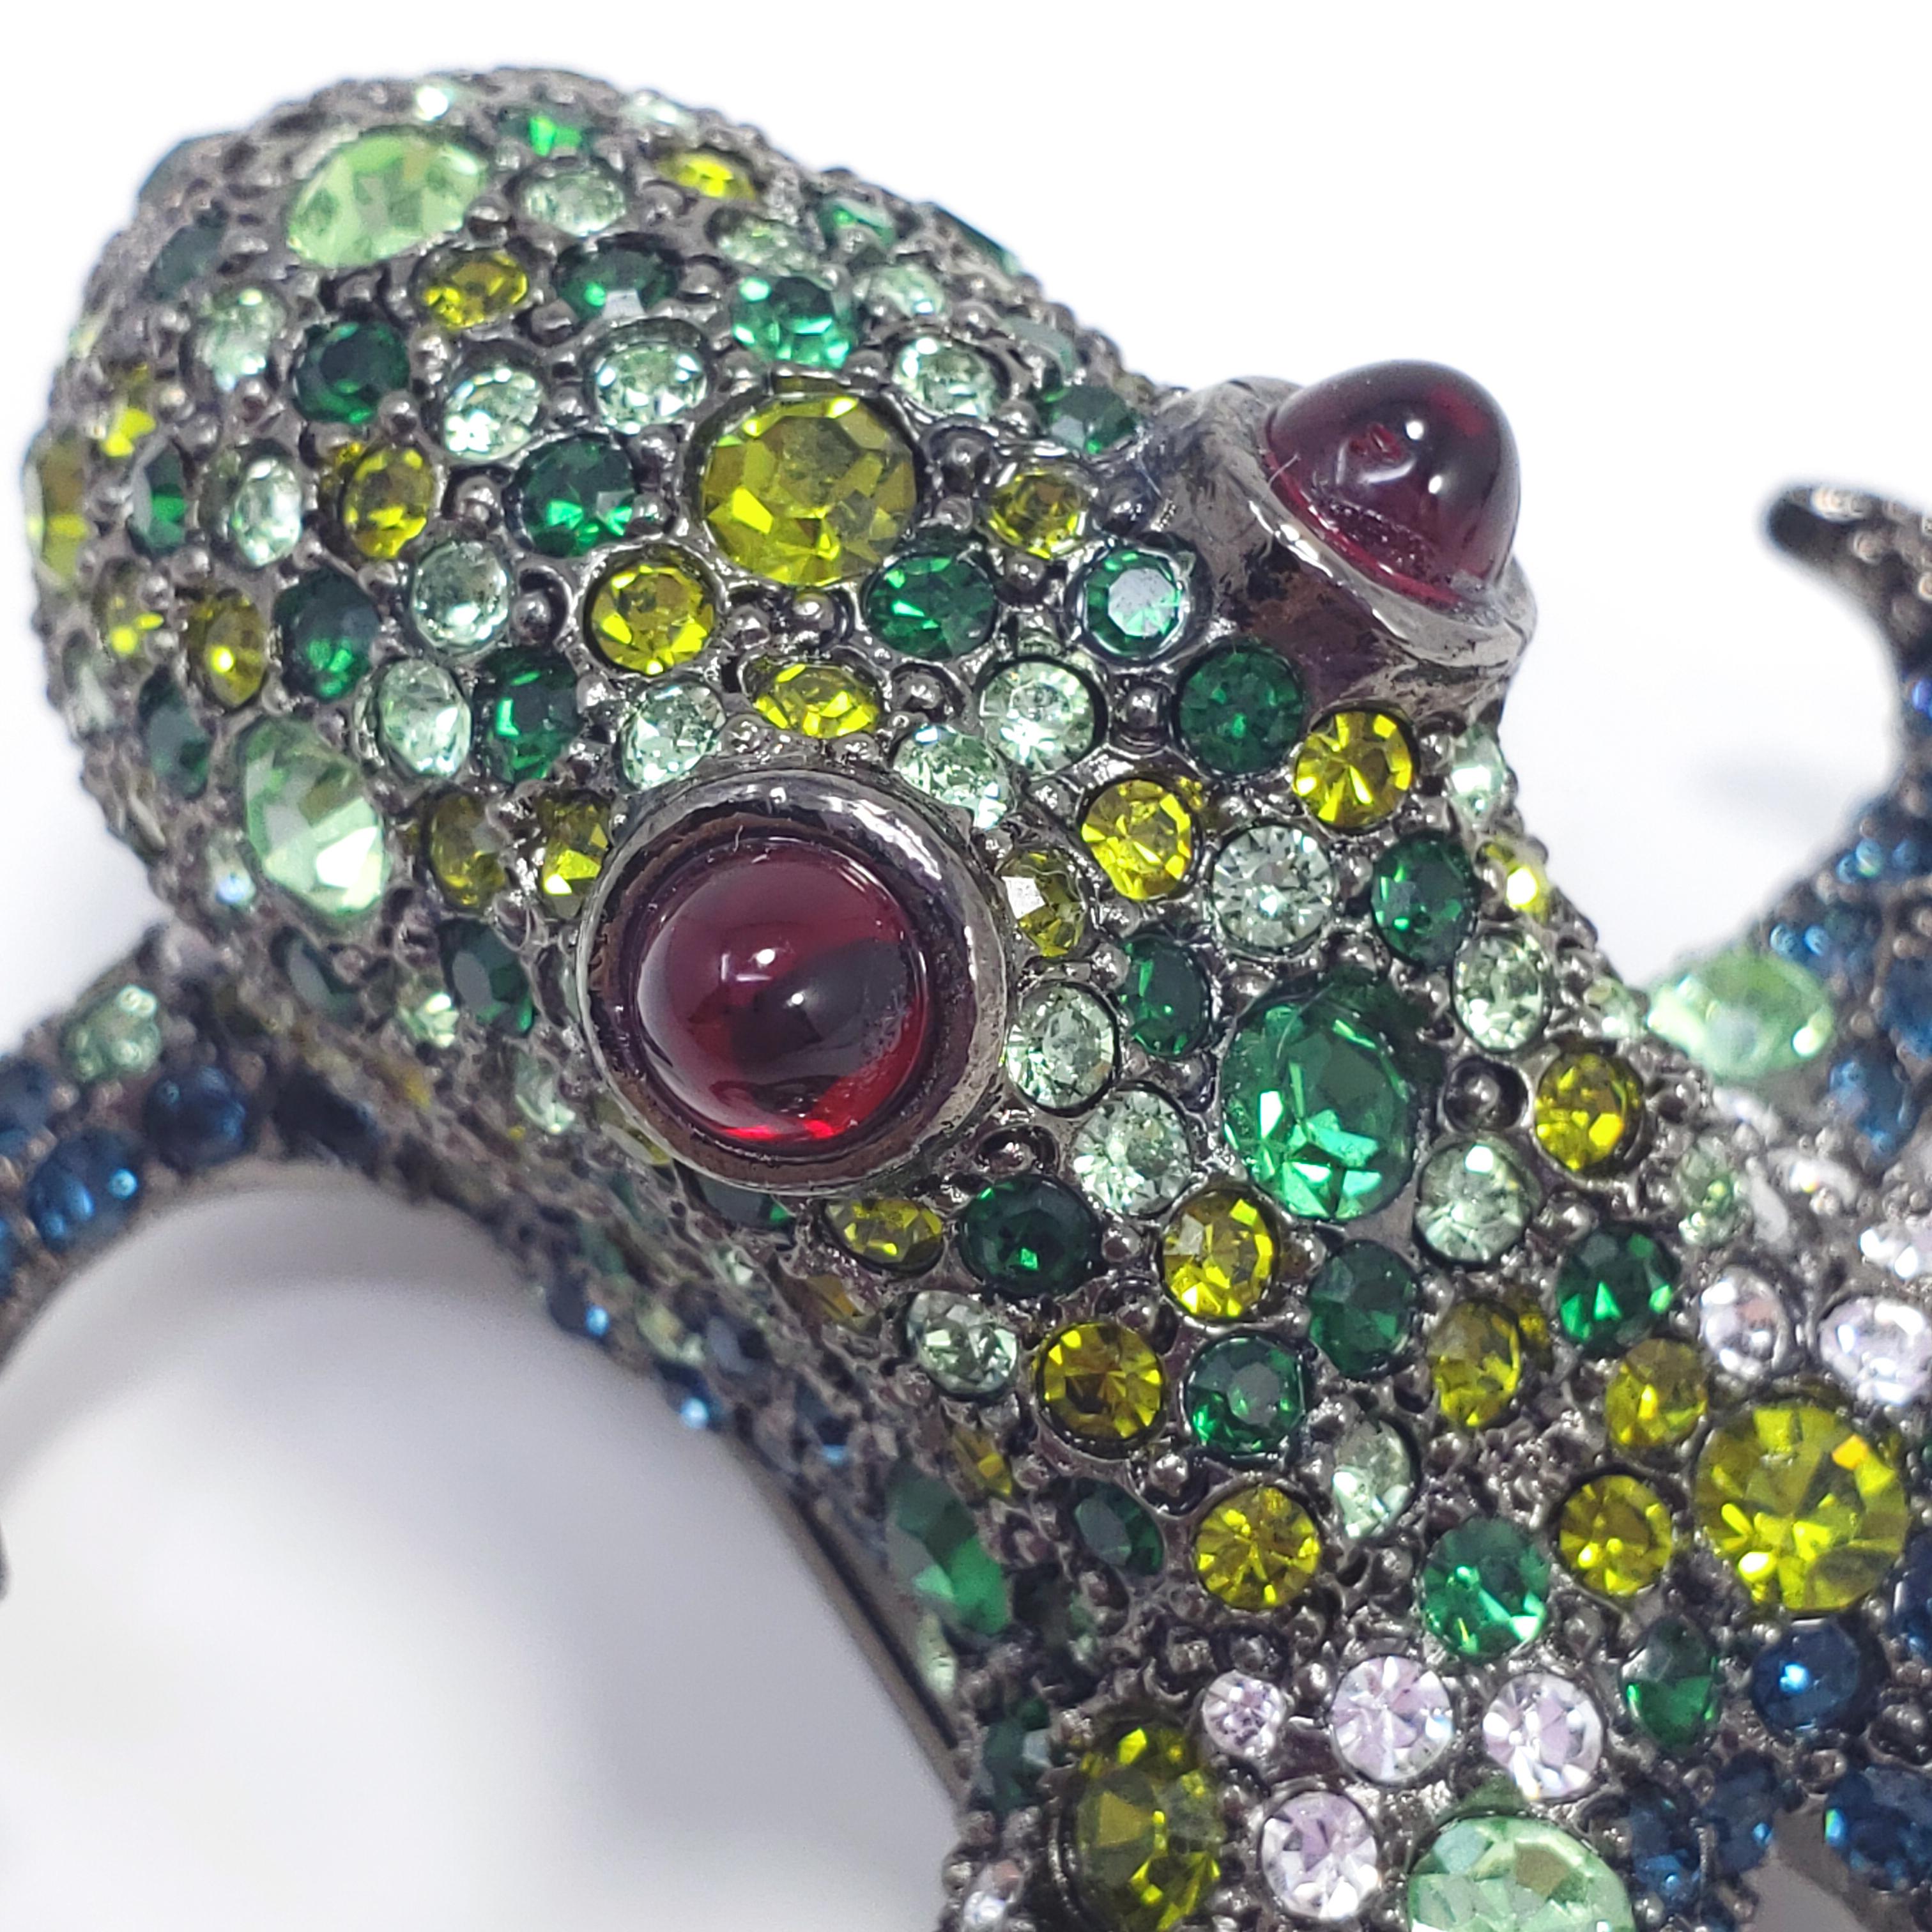 Women's or Men's KJL Kenneth Jay Lane Pave Green and White Crystal Octopus Brooch